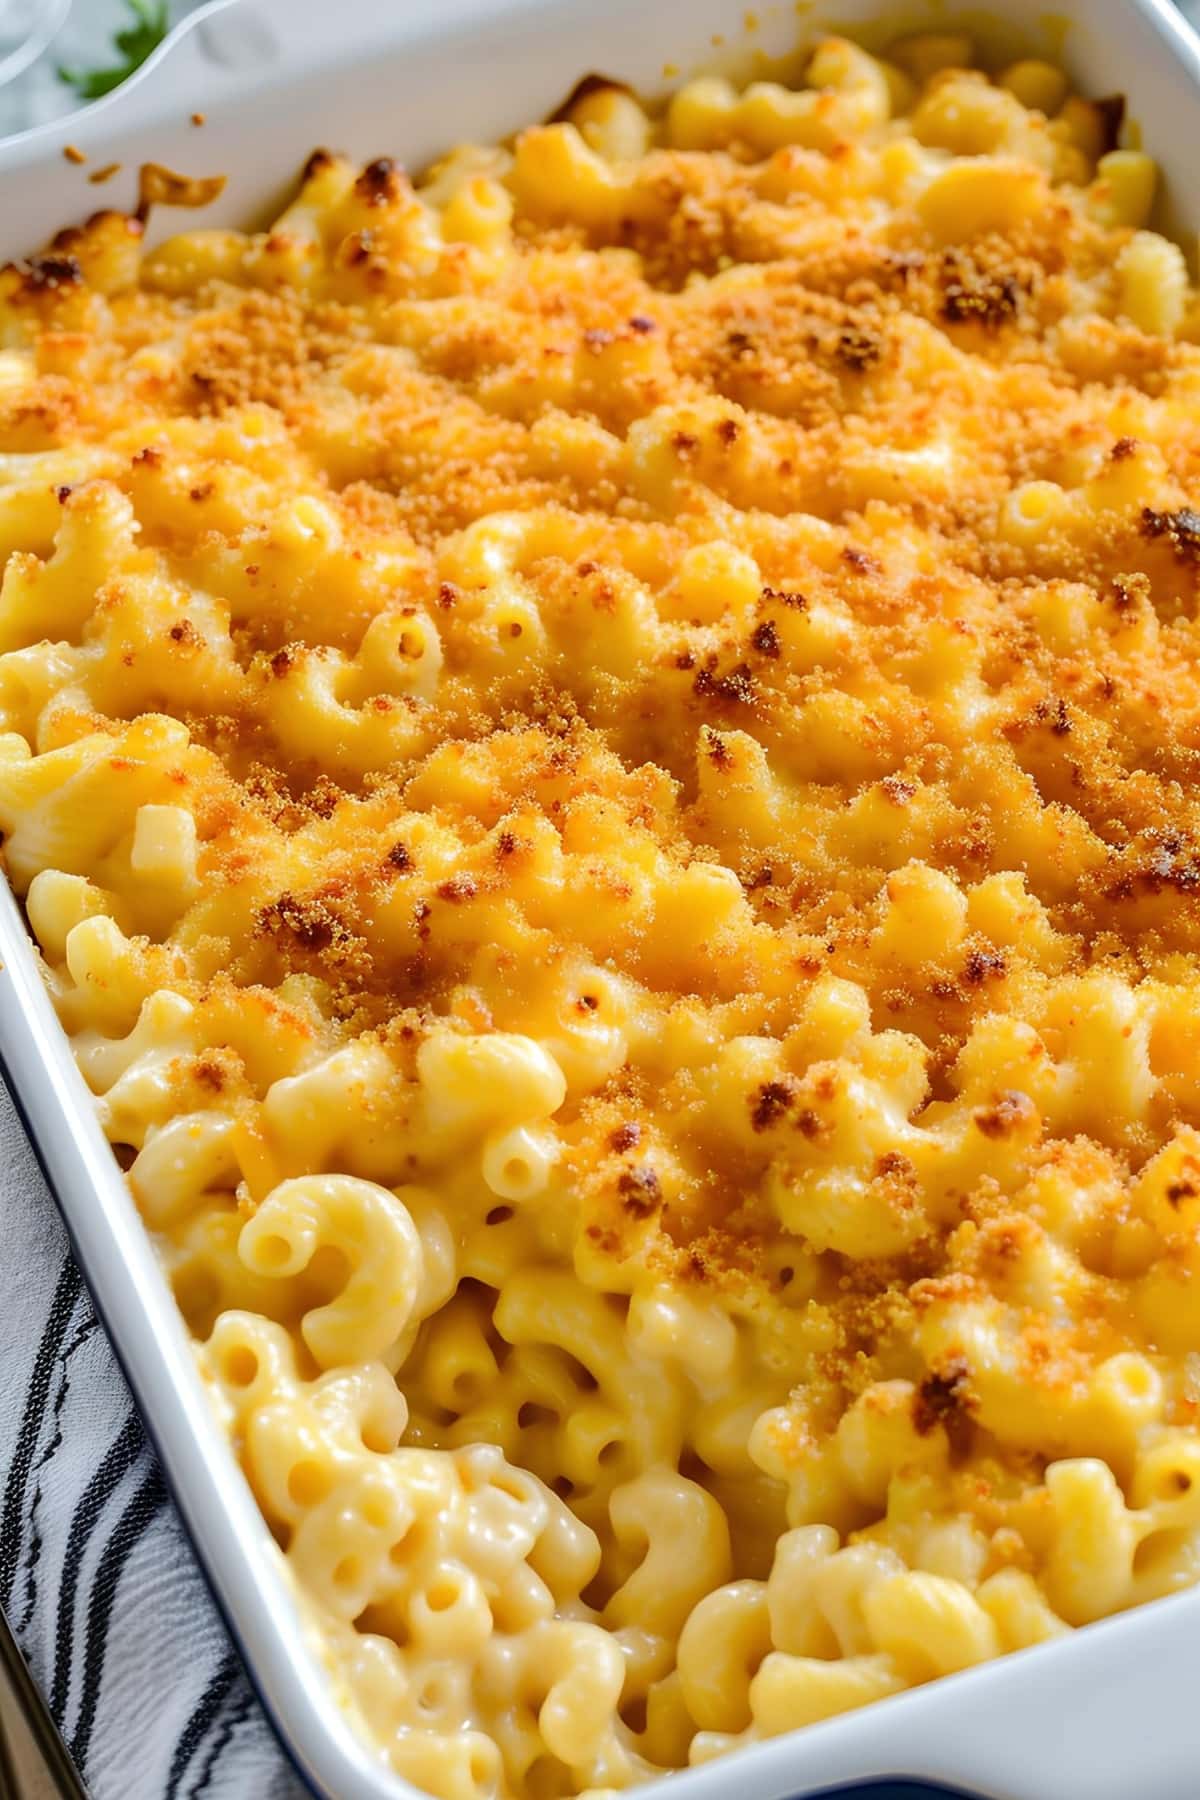 A Casserole Dish Filled with Macaroni and Cheese